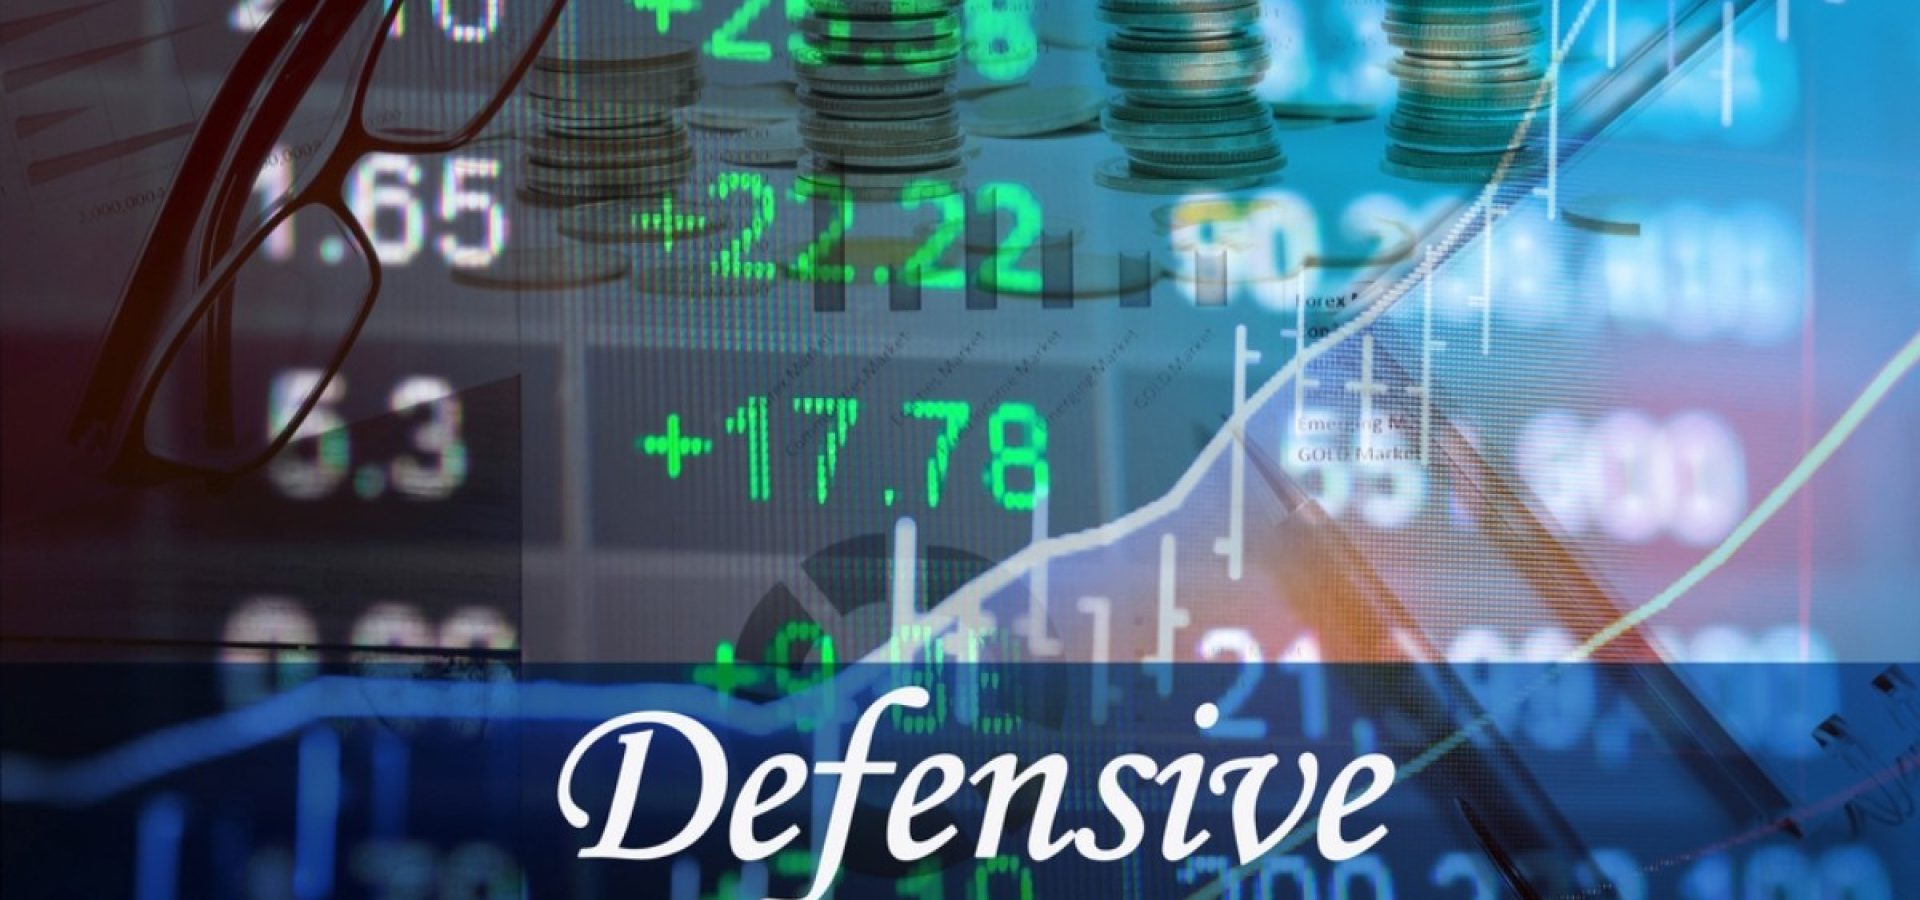 What is a defensive stock? All details